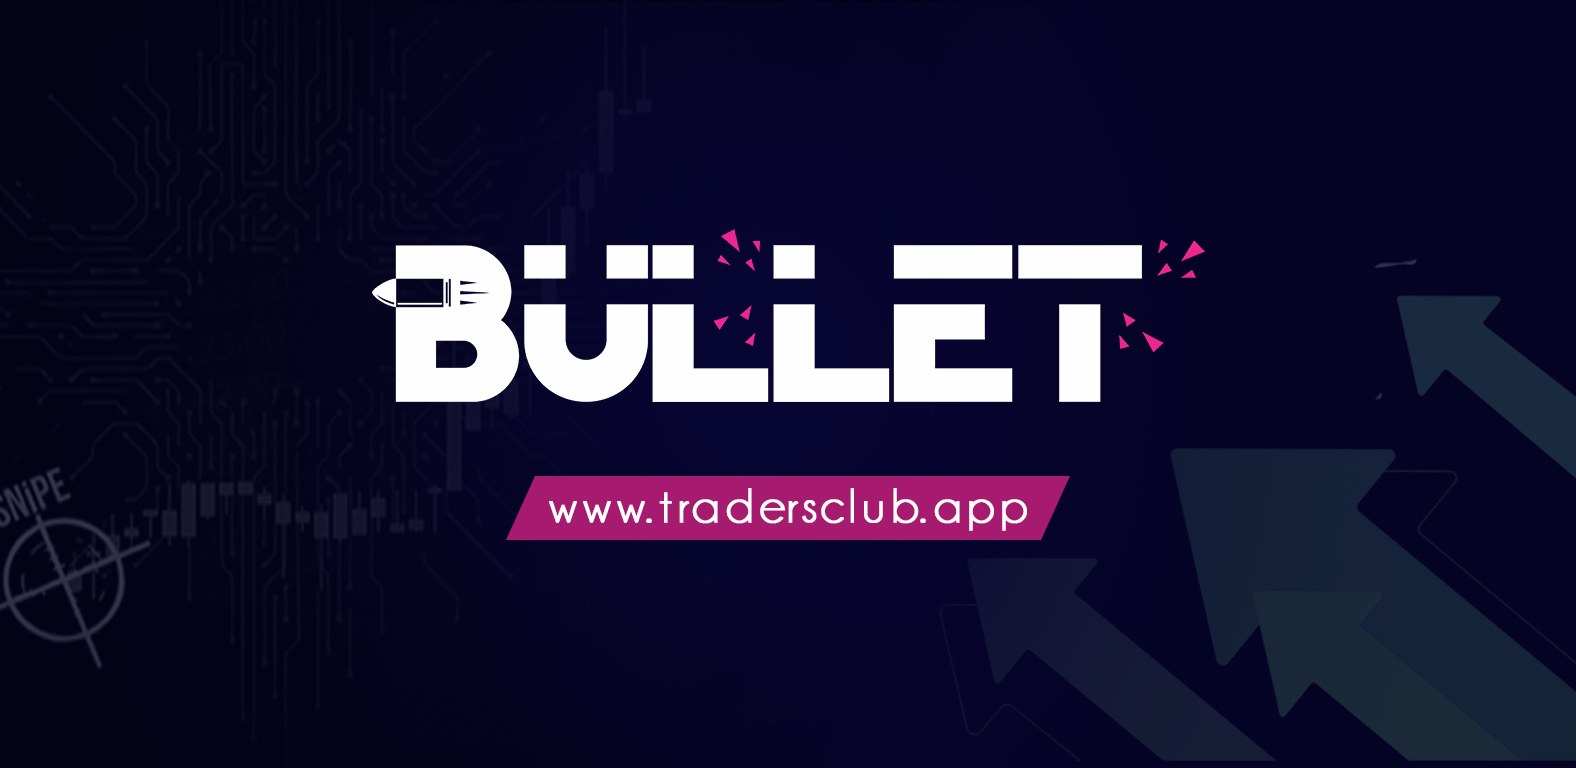 TradersClub is delighted to present The Bullet An innovation within the DeFI for traders